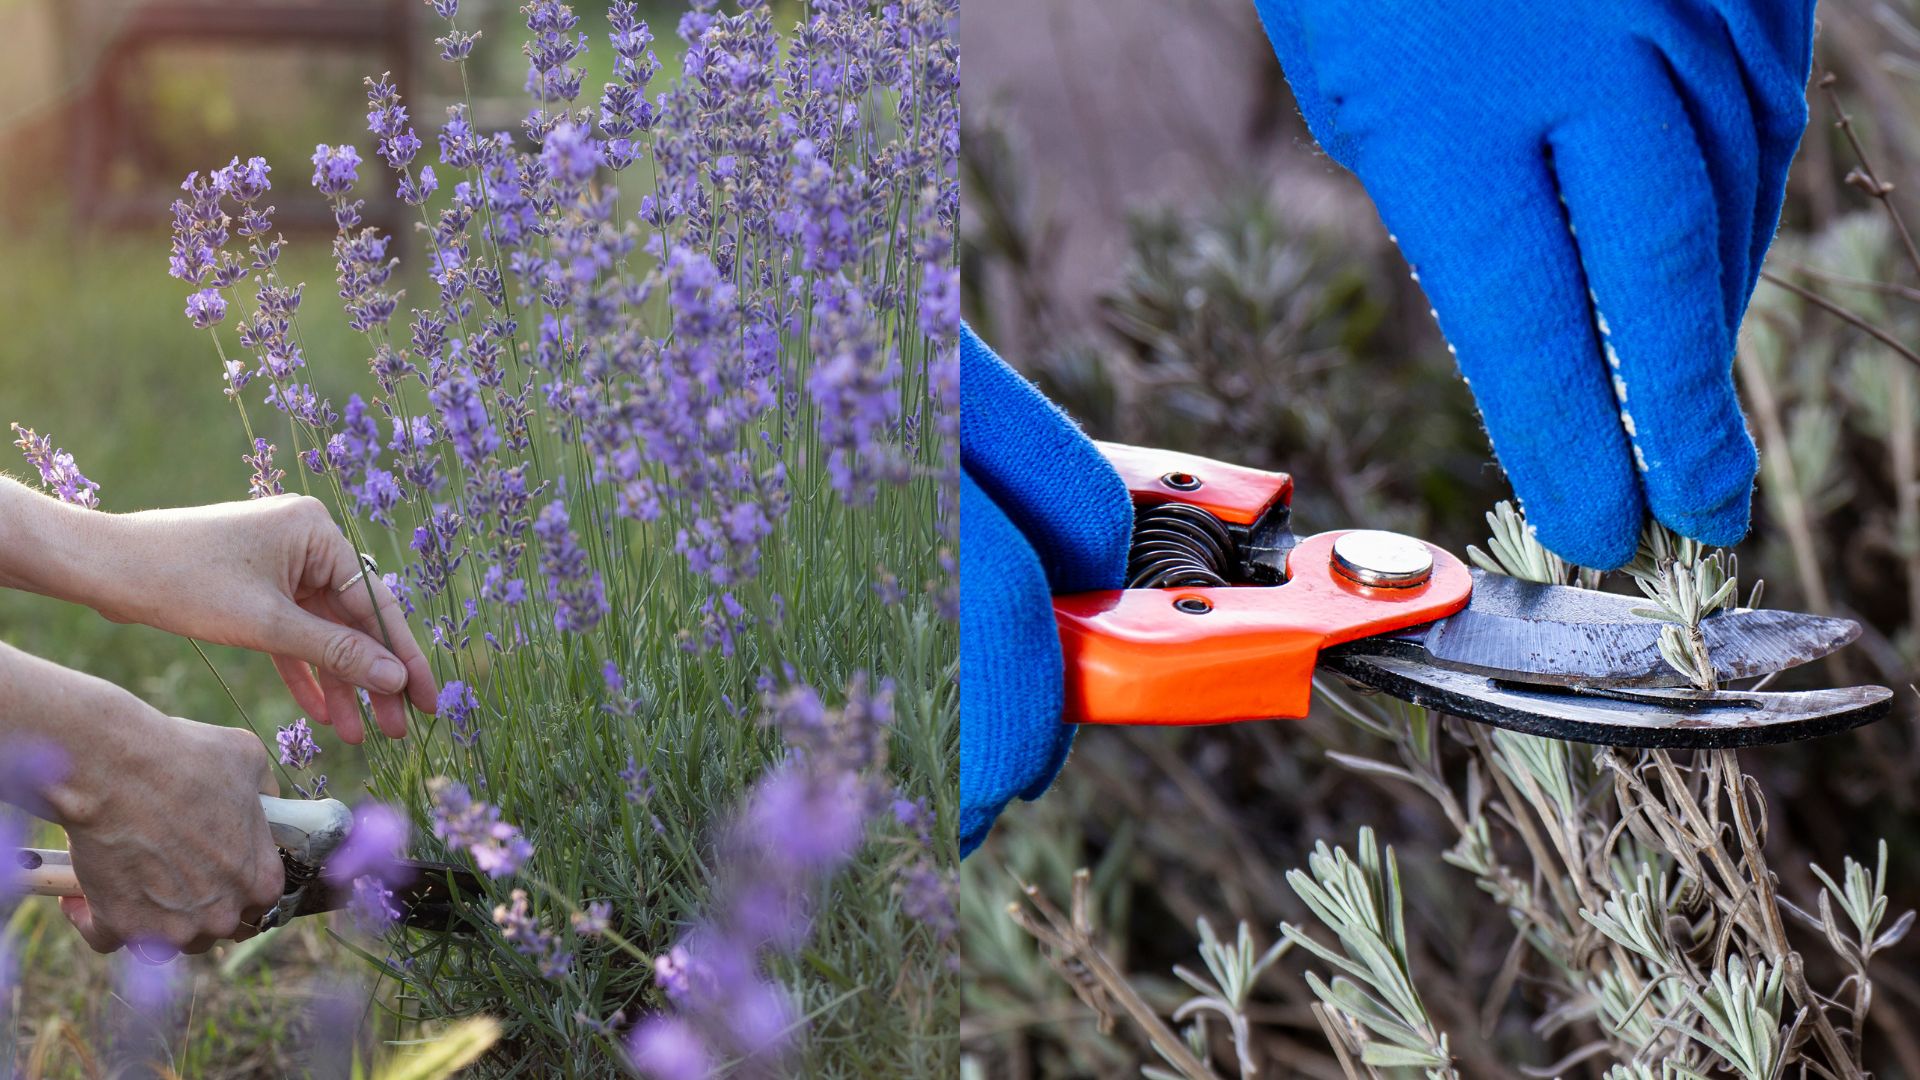 What’s The Best Time For Pruning Lavender?